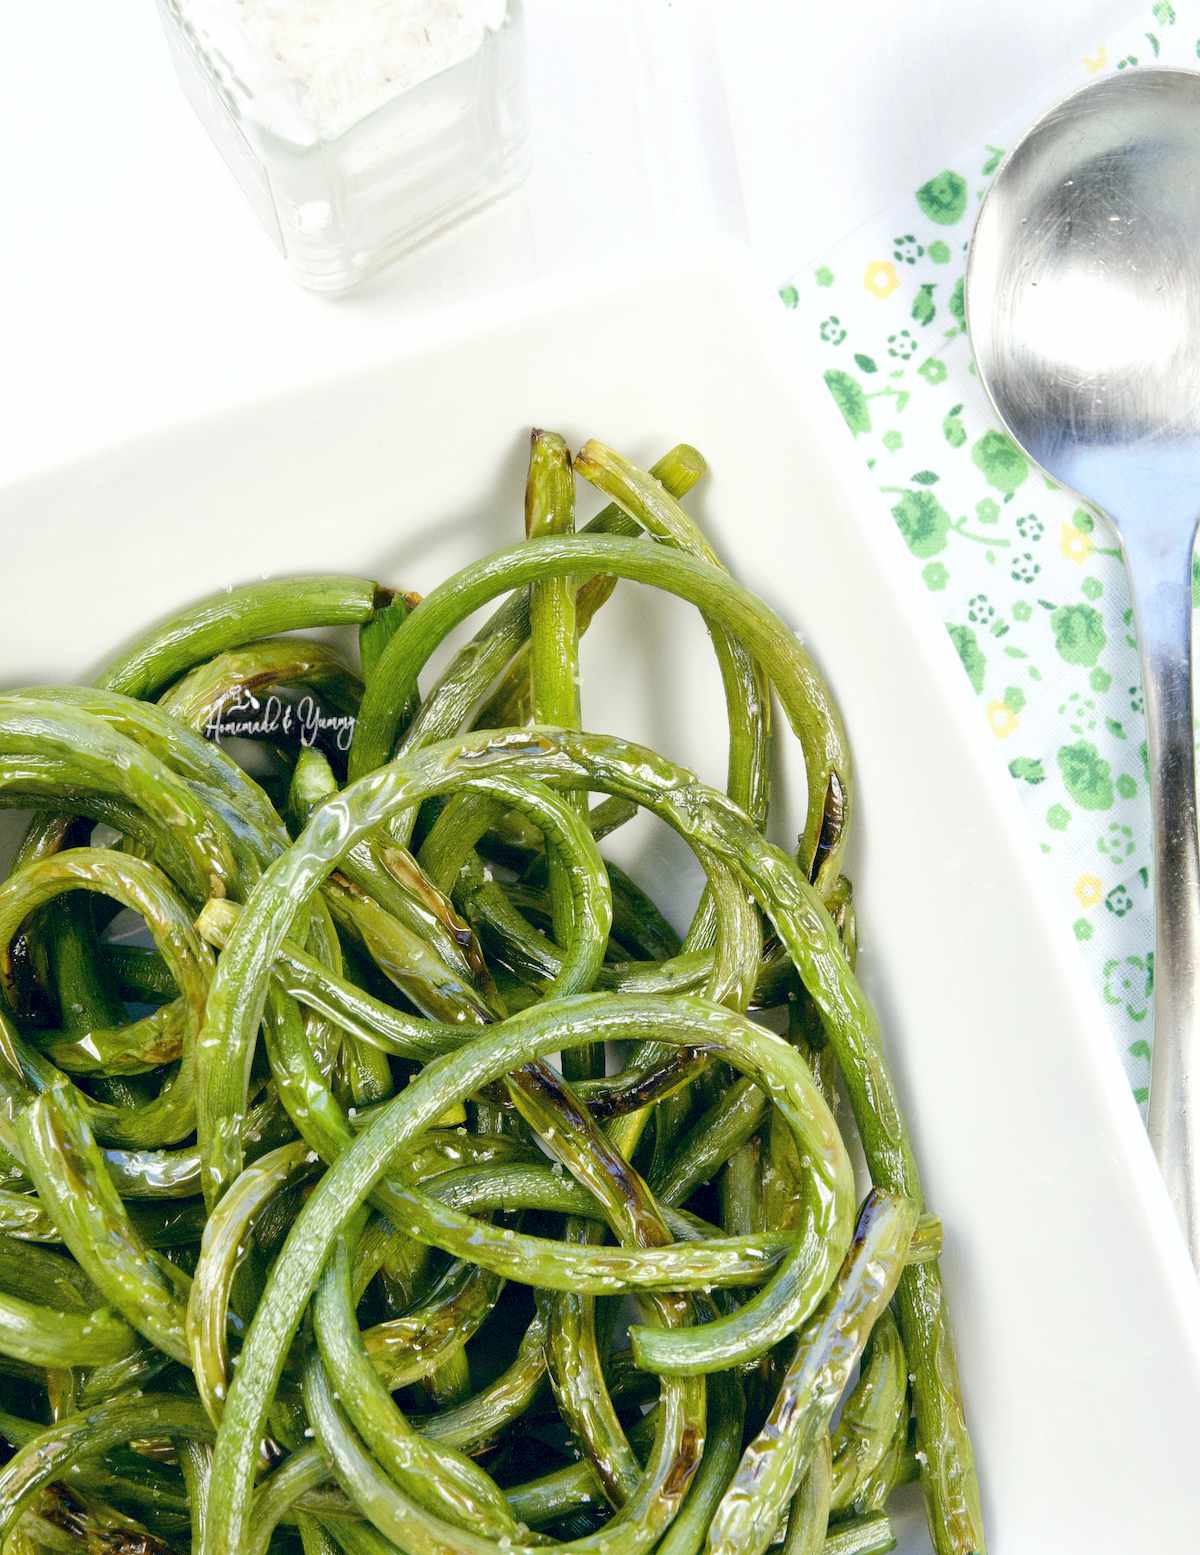 Grilled Garlic Scapes in a white bowl ready to eat.